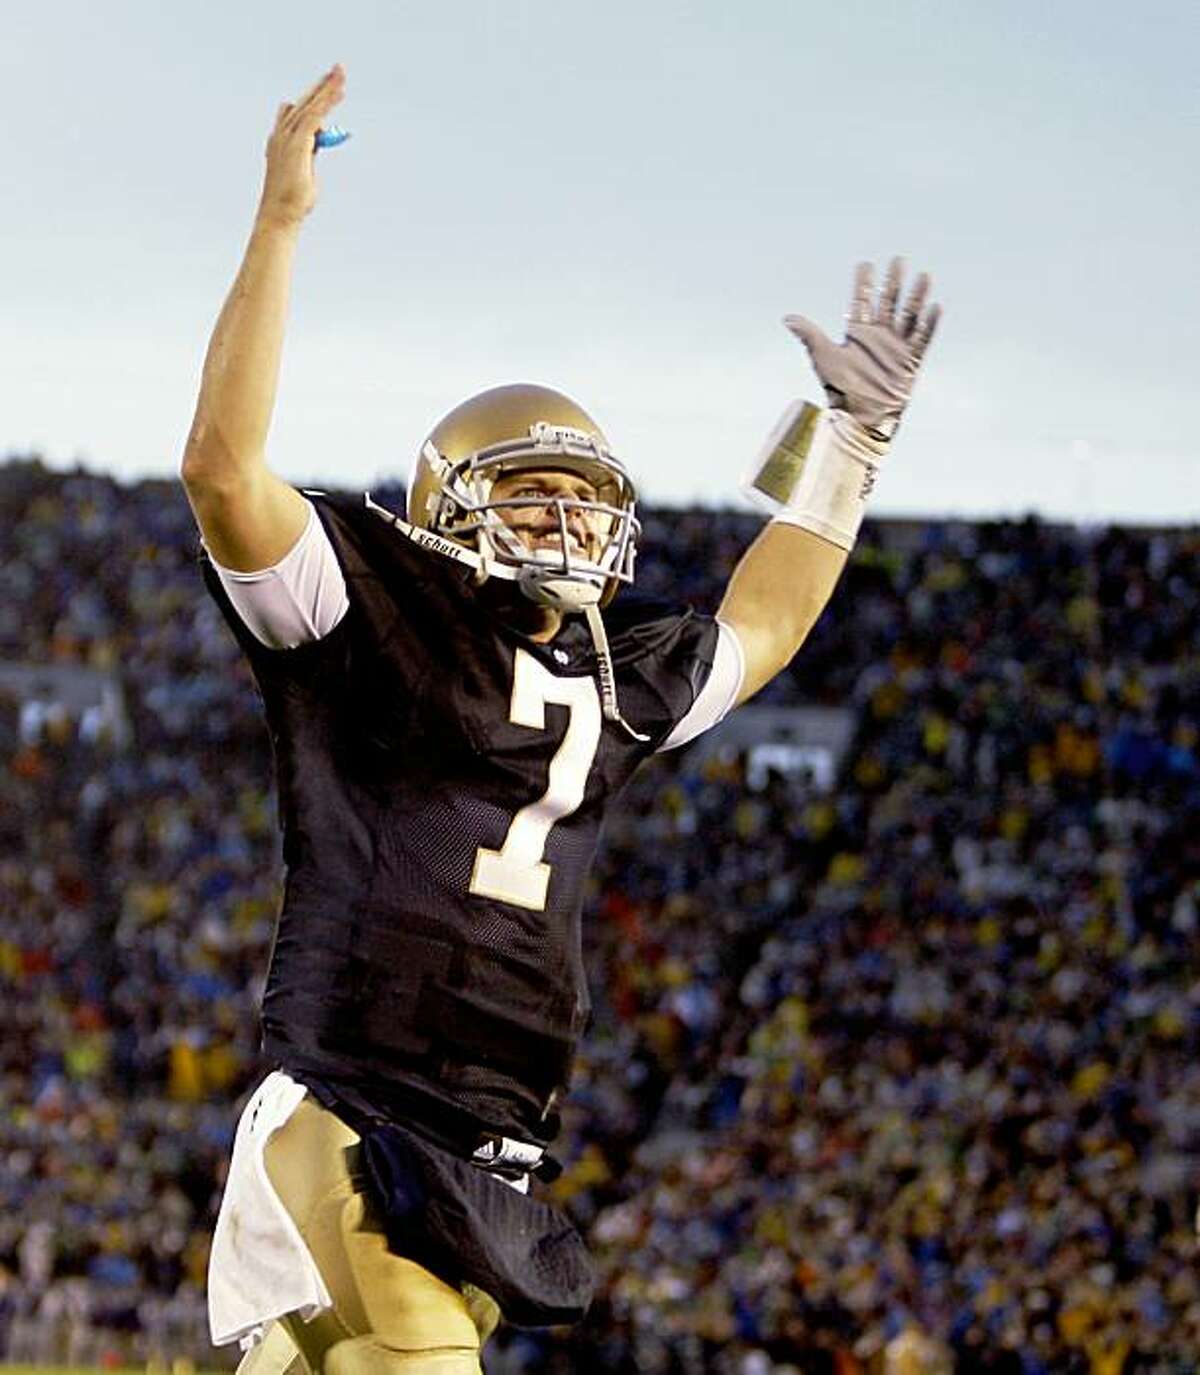 Notre Dame quarterback Jimmy Clausen celebrates a two-point conversion to take a three point lead over Washington late in the fourth quarter during an NCAA college football game in South Bend, Ind., Saturday, Oct. 3, 2009. Notre Dame defeated Washington 37-30 in overtime. (AP Photo/Michael Conroy)